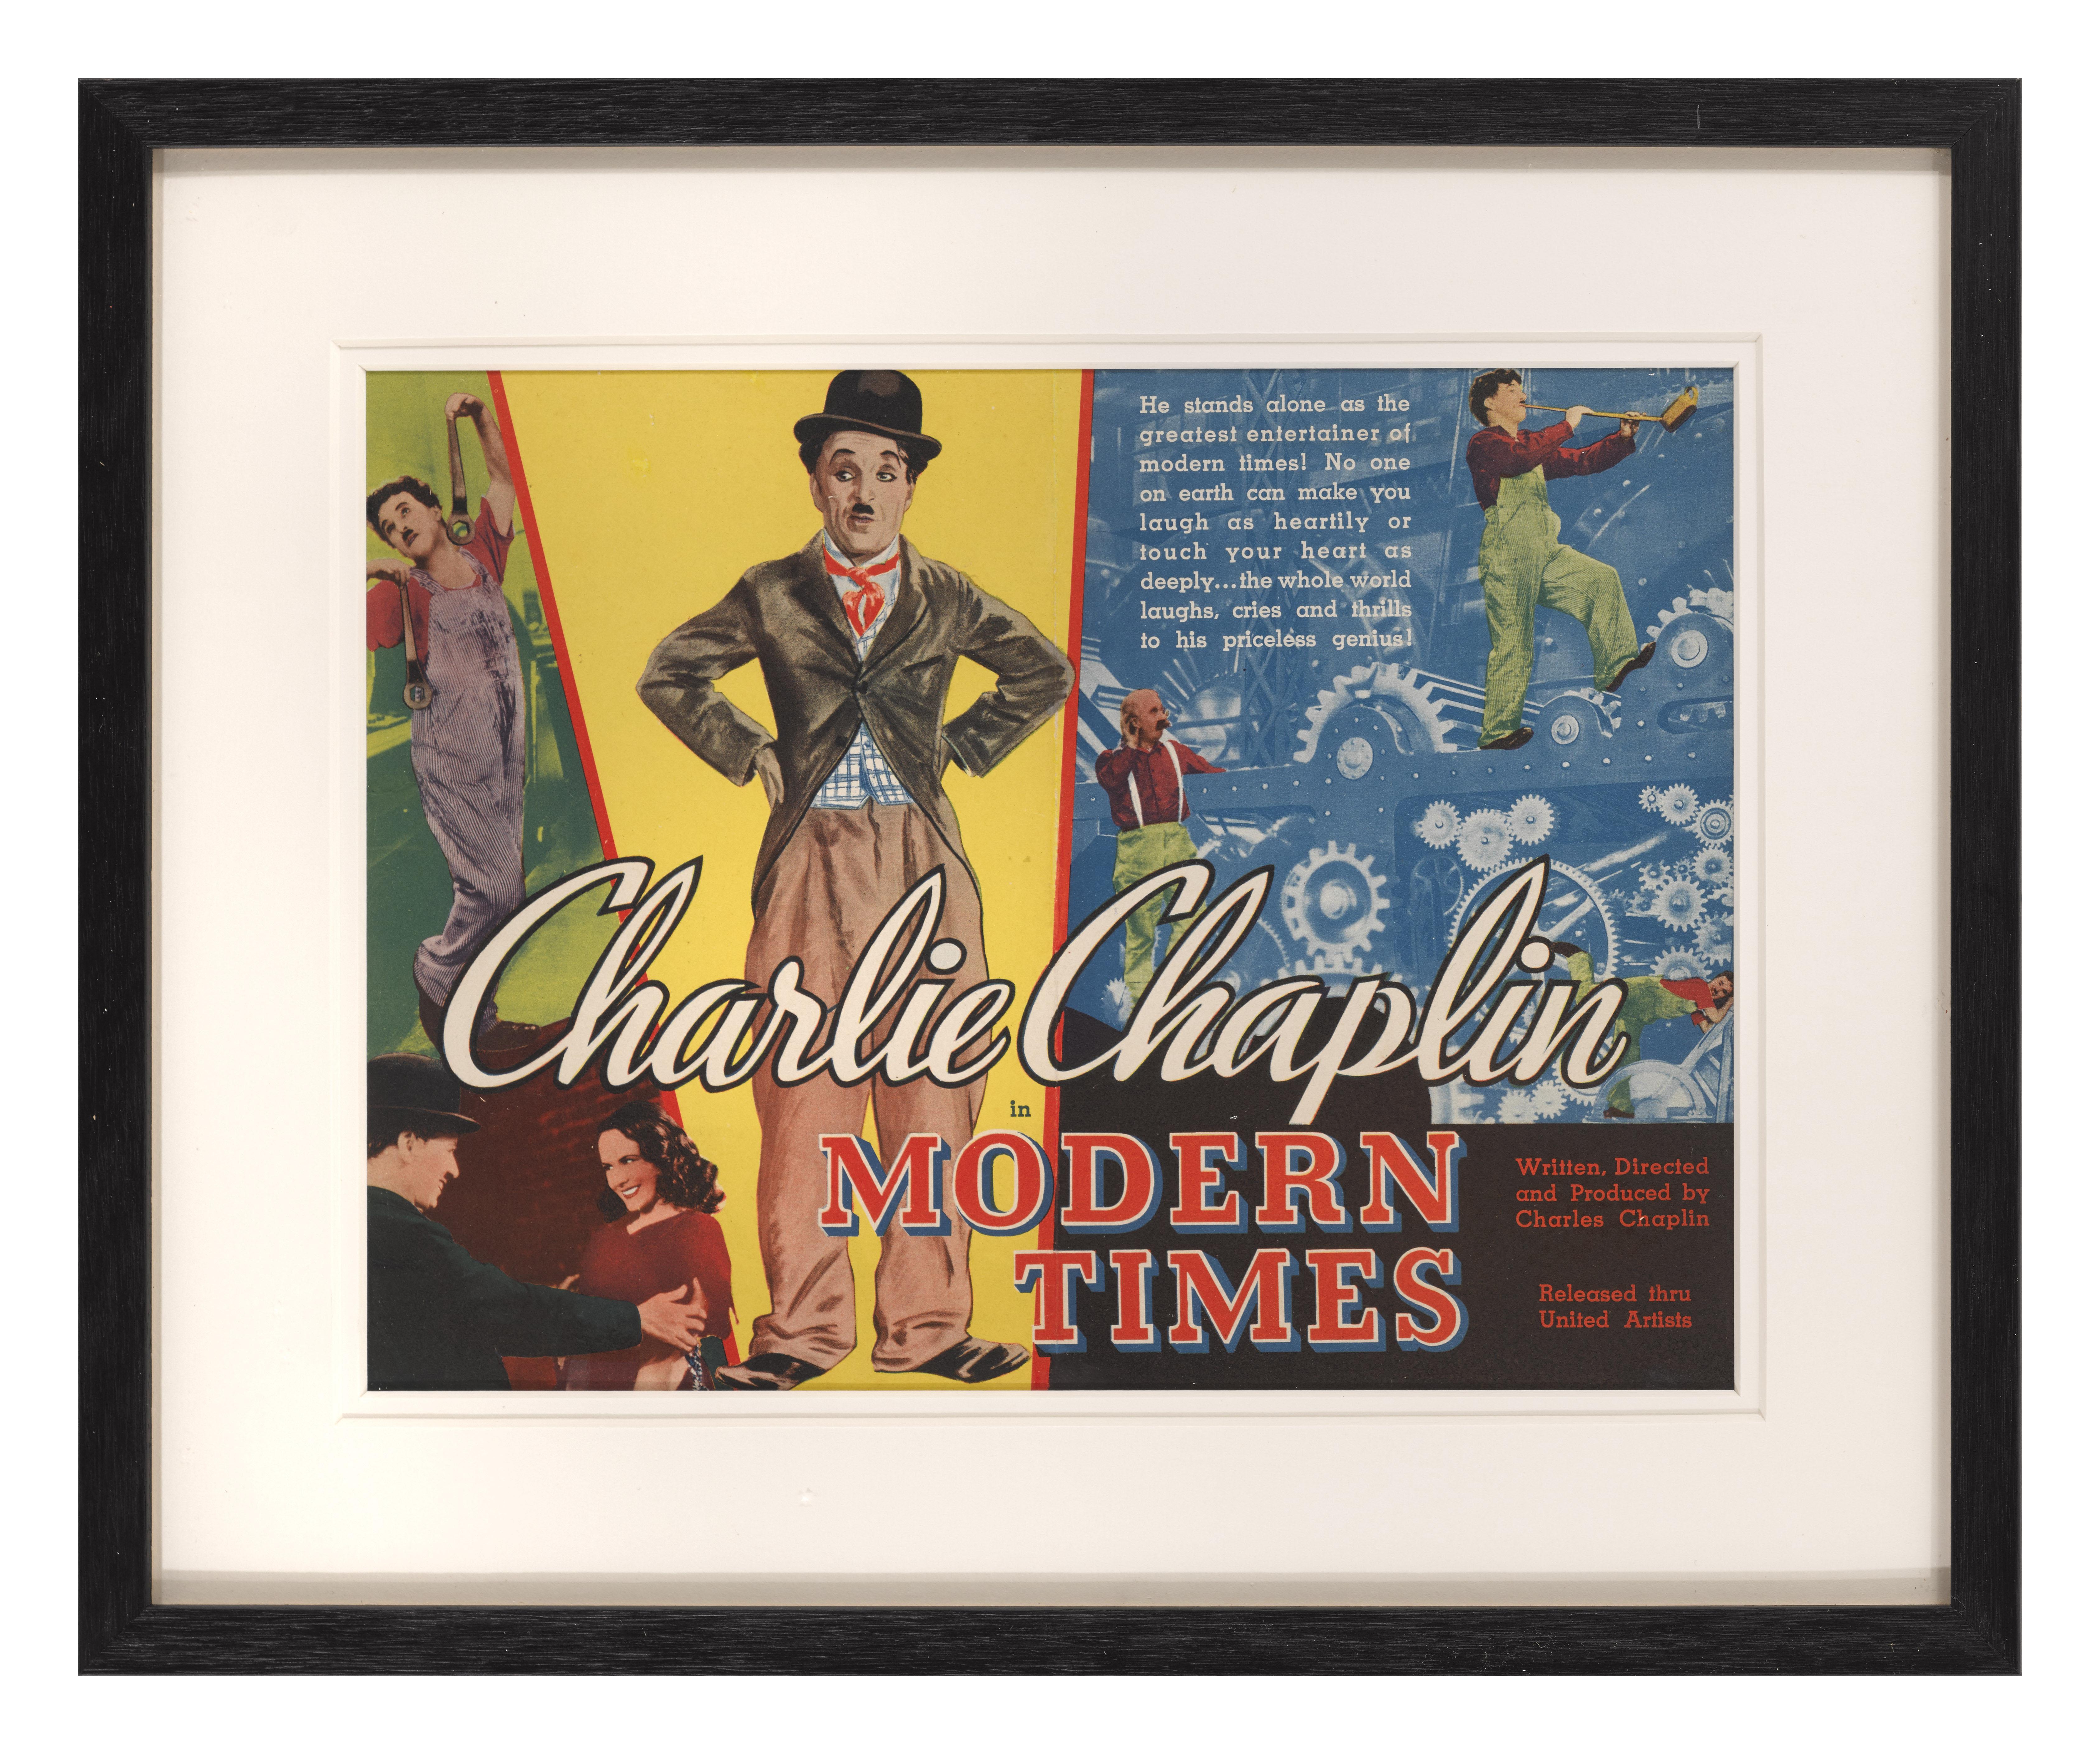 Original US Herald for the 1936 Comedy romance directed and starring Charlie Chaplin. This Herald would have been given out in the cinema in 1936.
This piece is conservation paper backed and conservation framed in a Tulip wood frame with card